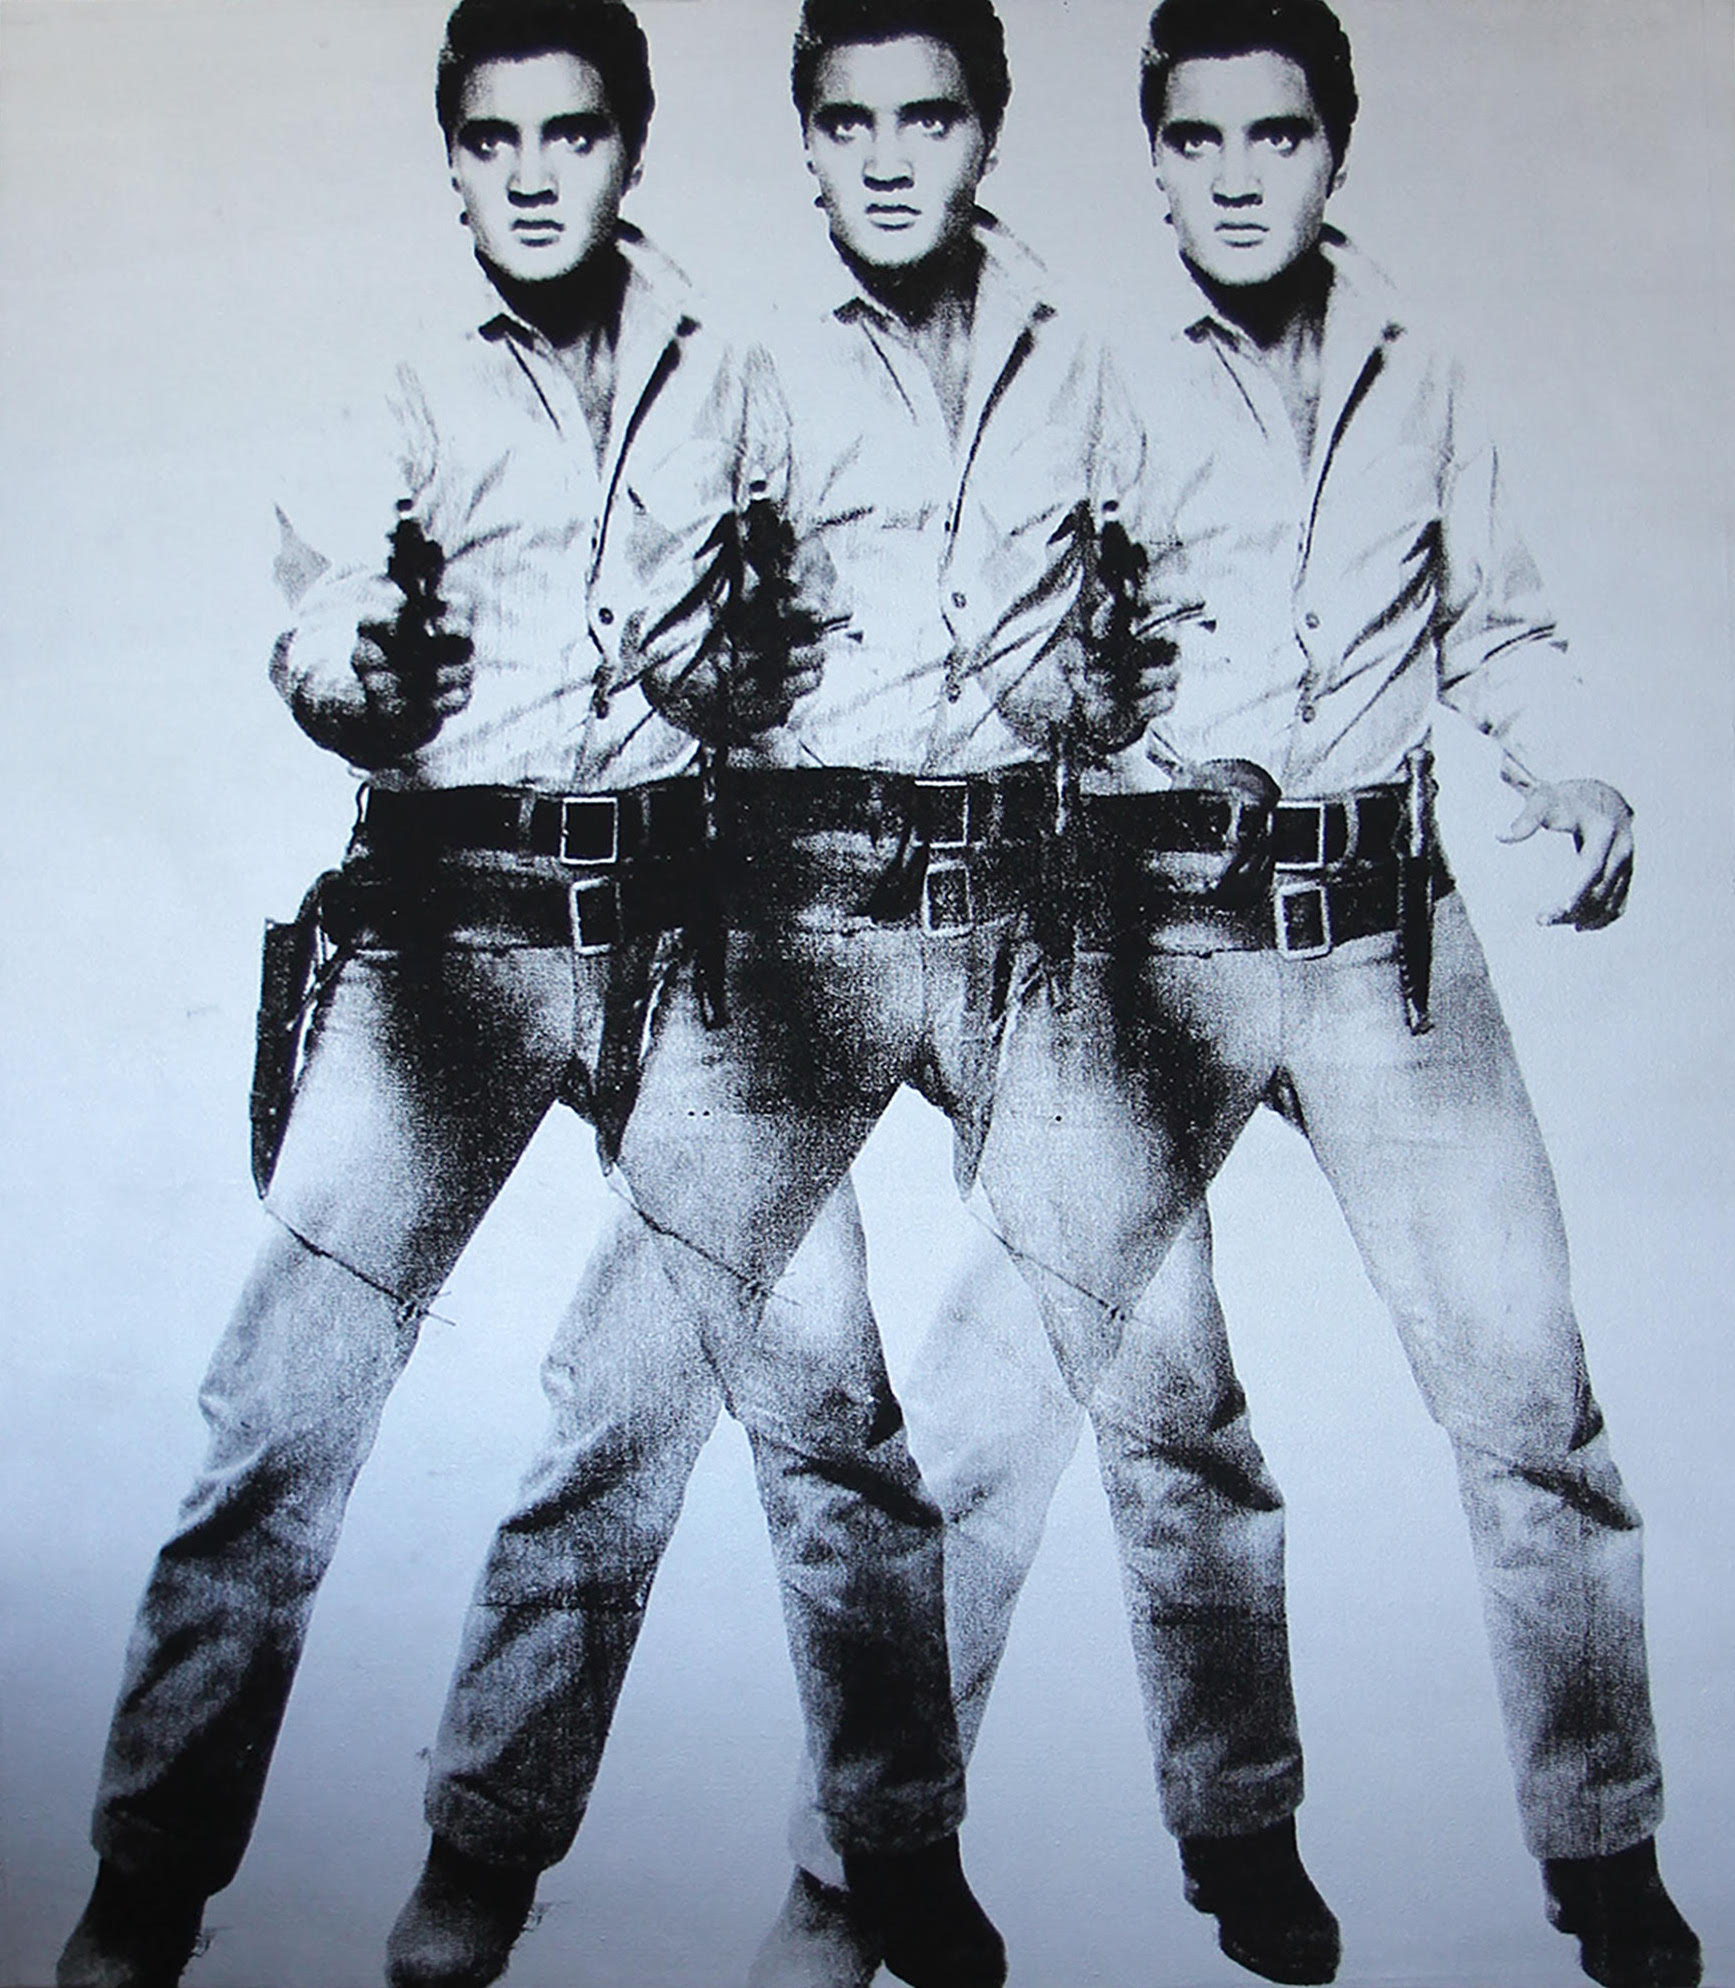 Three overlapping images of Elvis screen printed on canvas